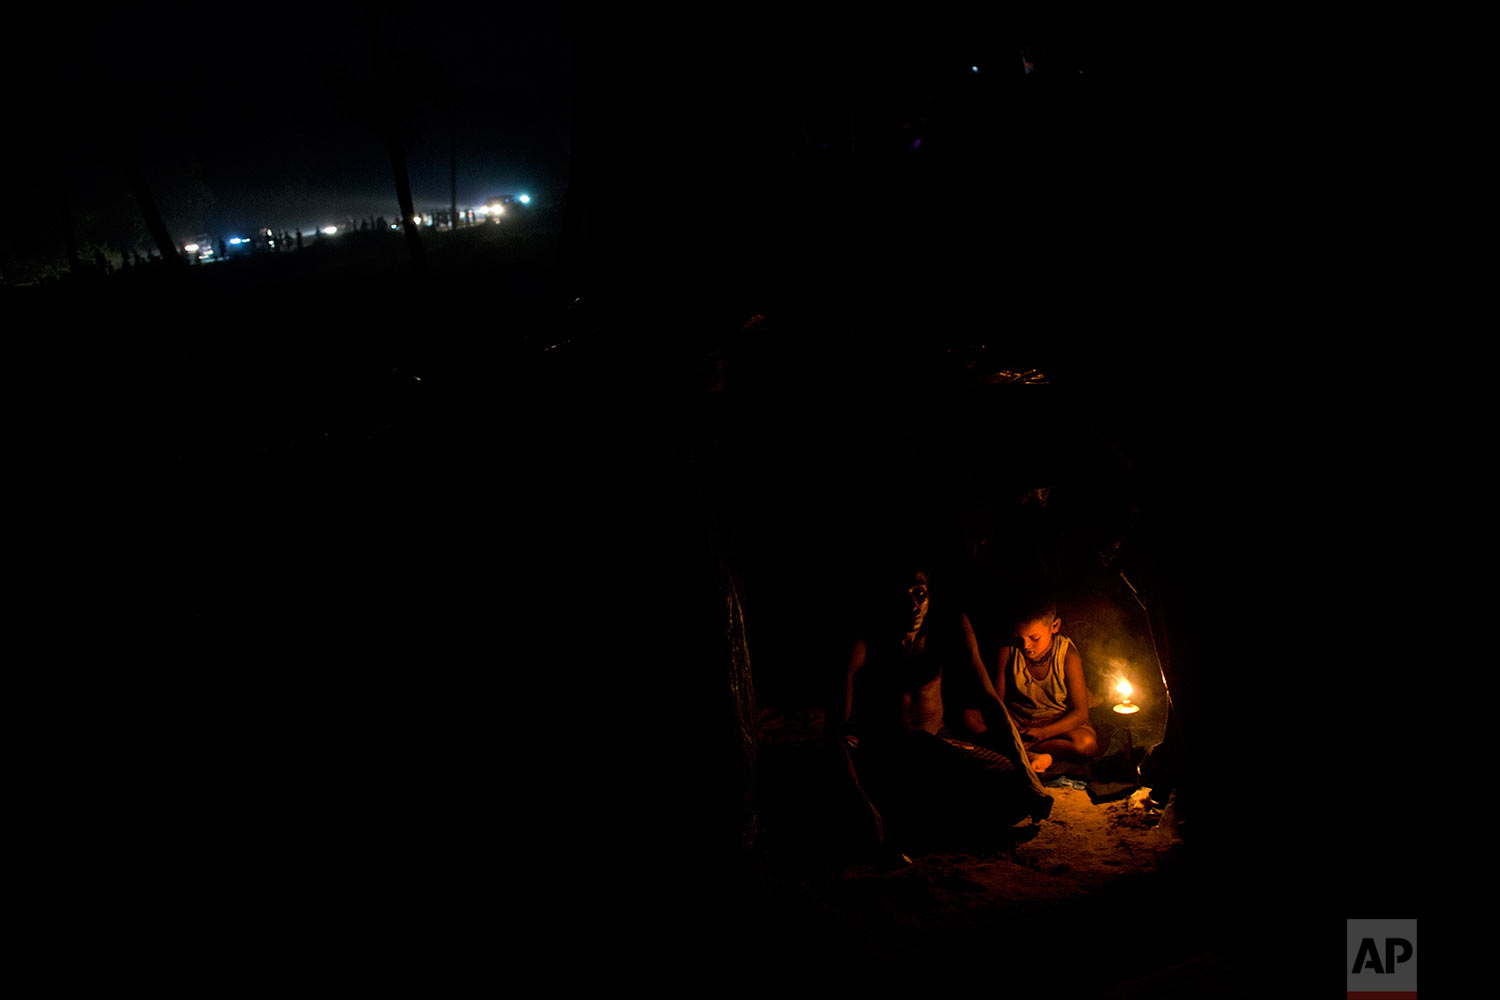 Rohingya Muslims rest inside a new tent next to Kutupalong refugee camp in Ukhia, Bangladesh, Tuesday, Sept. 5, 2017. Bangladesh, one of the world's poorest countries, was already sheltering some 100,000 Rohingya refugees before another 123,000 flooded in after Aug. 25, according to the U.N. refugee agency's latest estimate on Tuesday. (AP Photo/Bernat Armangue)